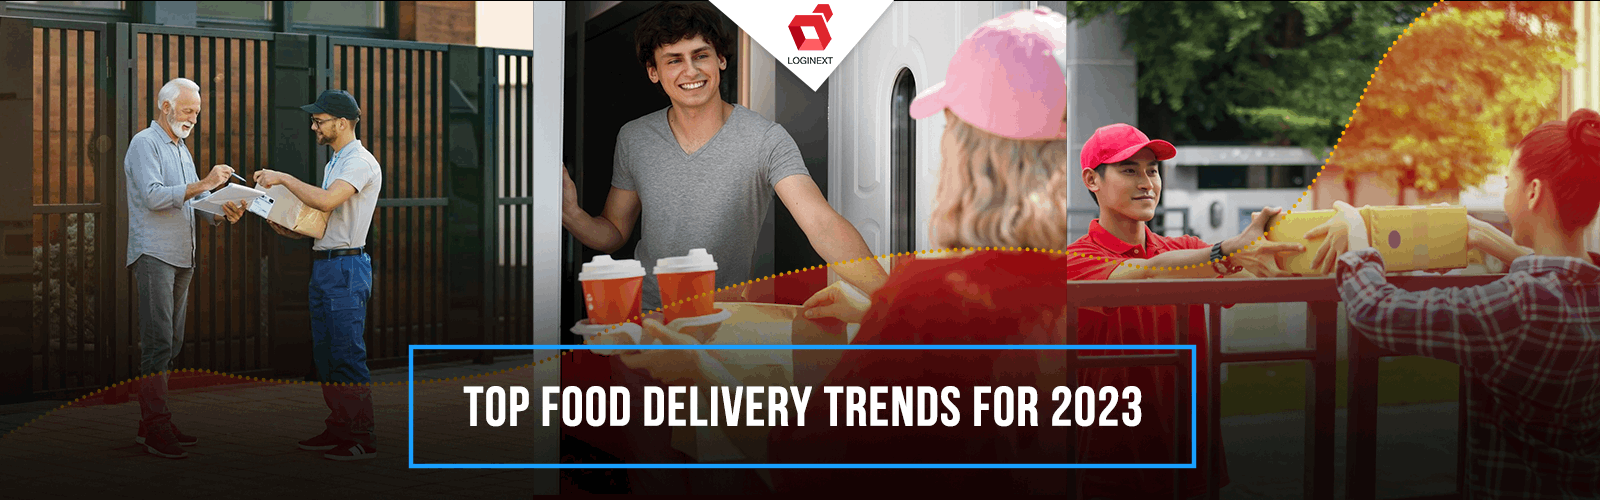 Top Food Delivery Automation Trends to Watch Out For in 2023